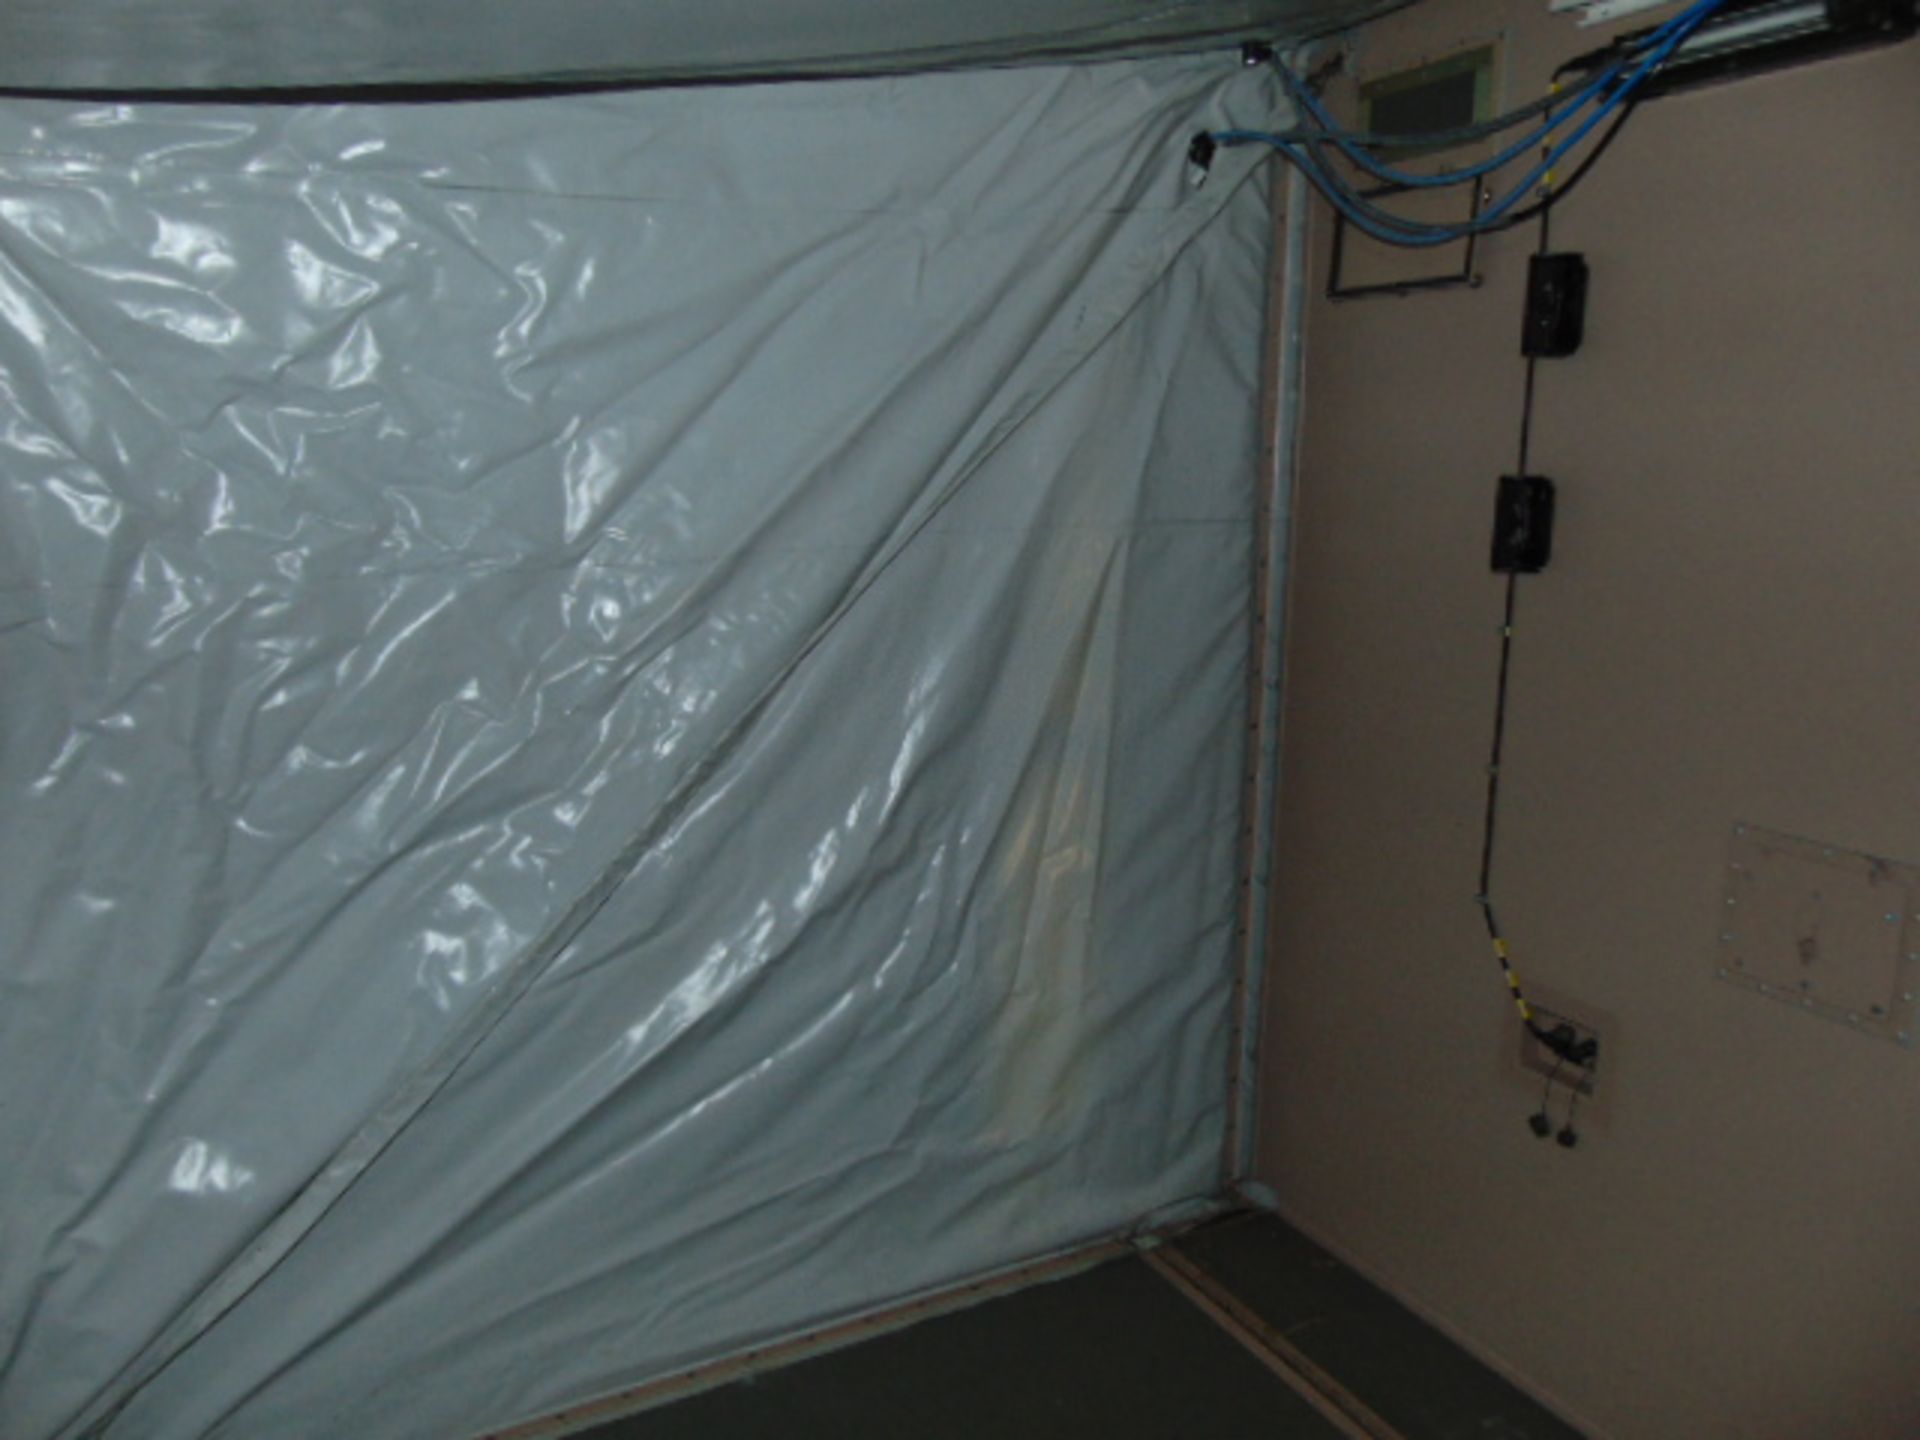 Containerised Insys Ltd Integrated Biological Detection/Decontamination System (IBDS) - Image 19 of 57